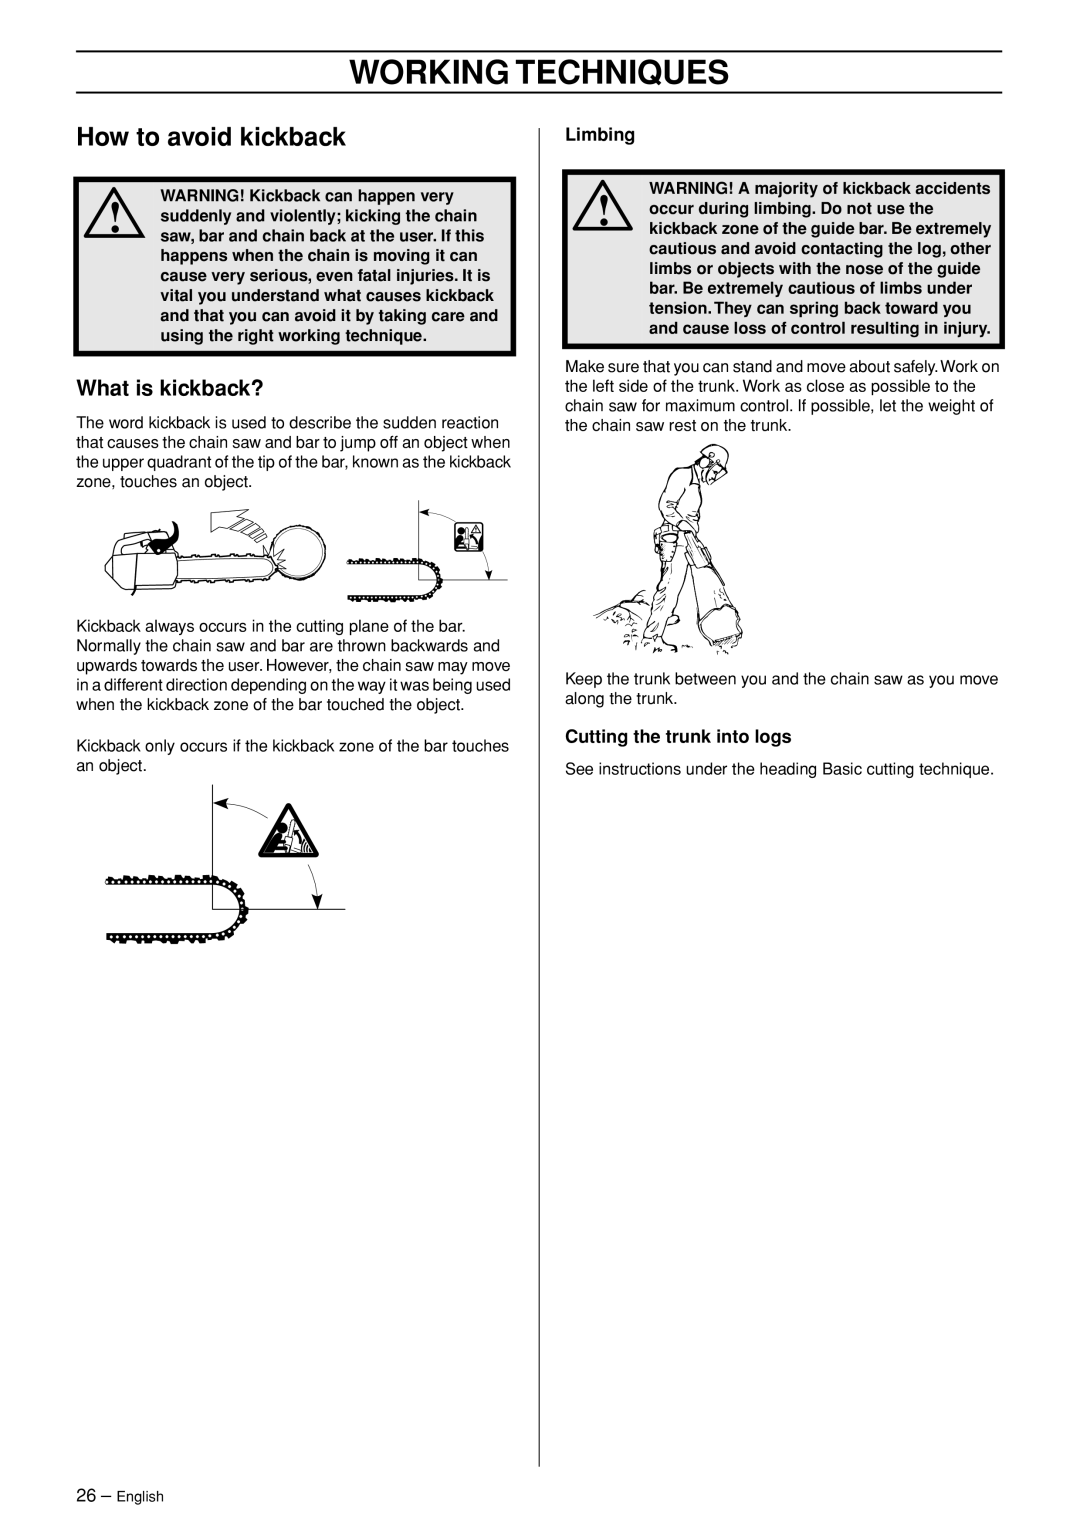 Jonsered CS 2139T manual How to avoid kickback, What is kickback?, Cutting the trunk into logs, Working Techniques, Limbing 